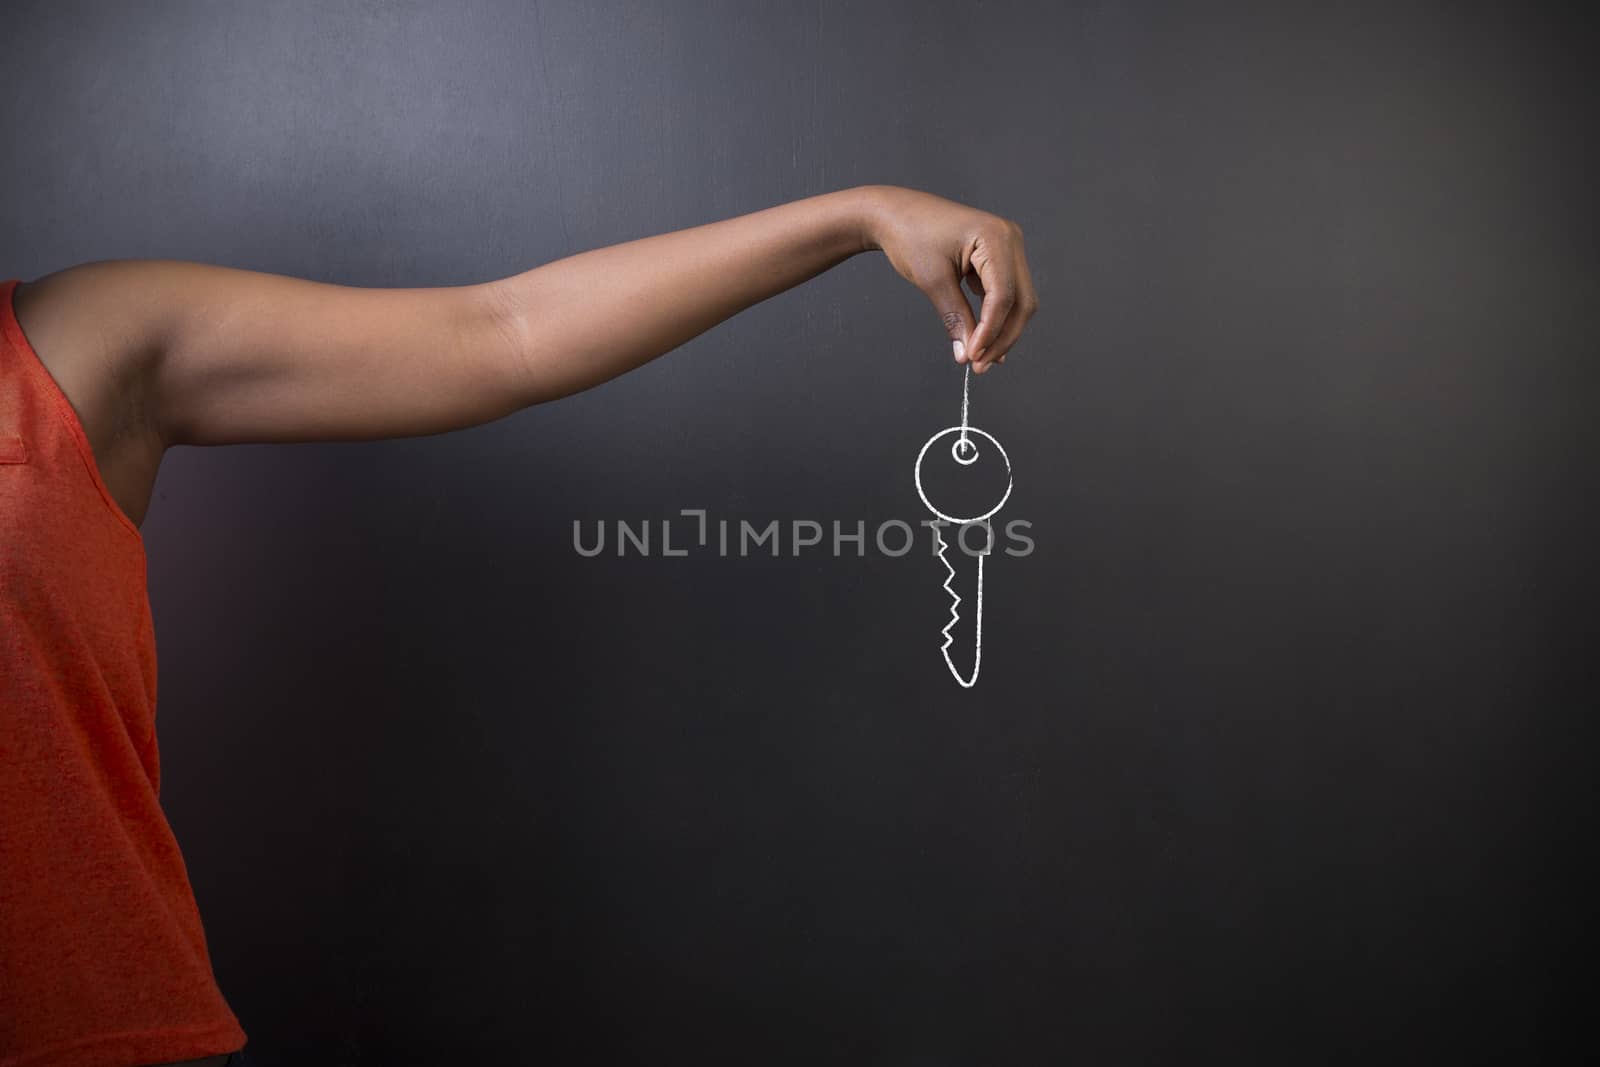 South African or African American woman teacher or student holding her hand out holding a chalk key standing against a blackboard background